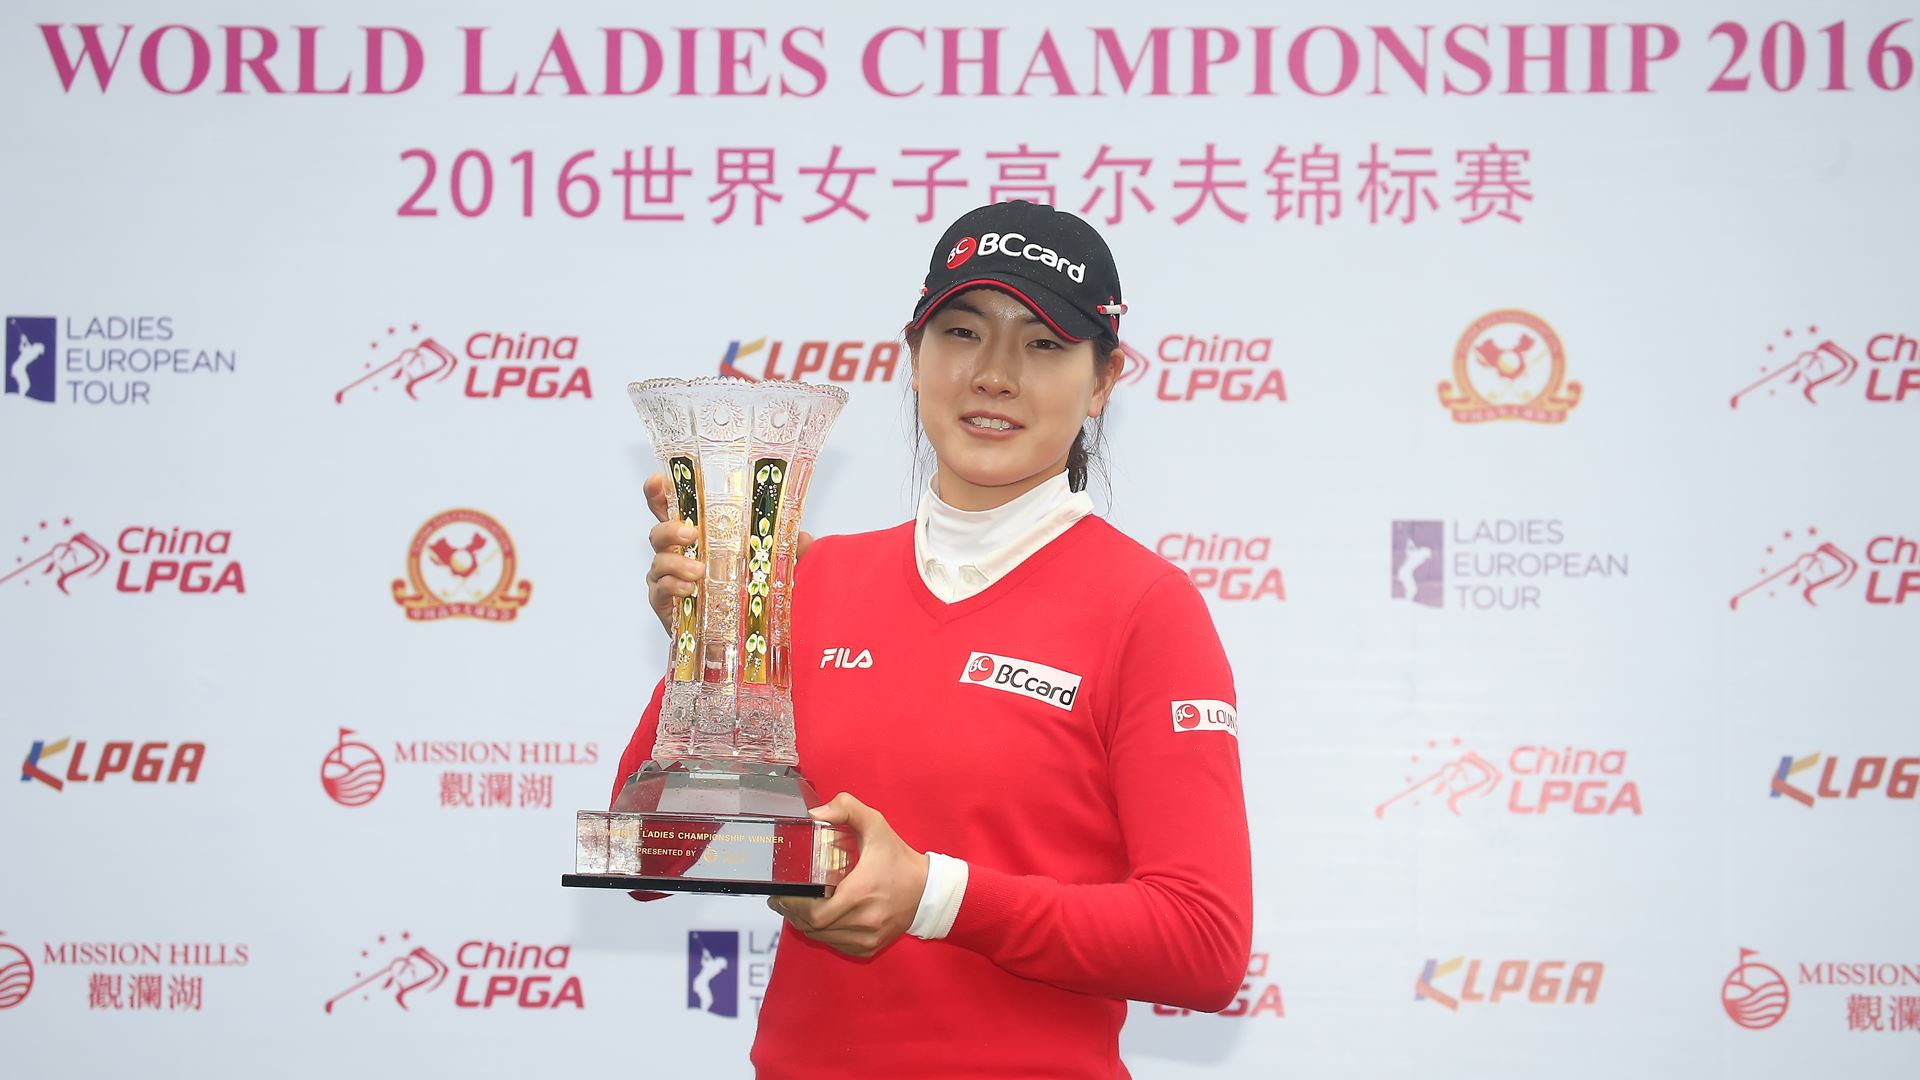 A Golfer of South Korea Jung Min Lee who is under sponsorship of FILA Dominates world Ladies Championship